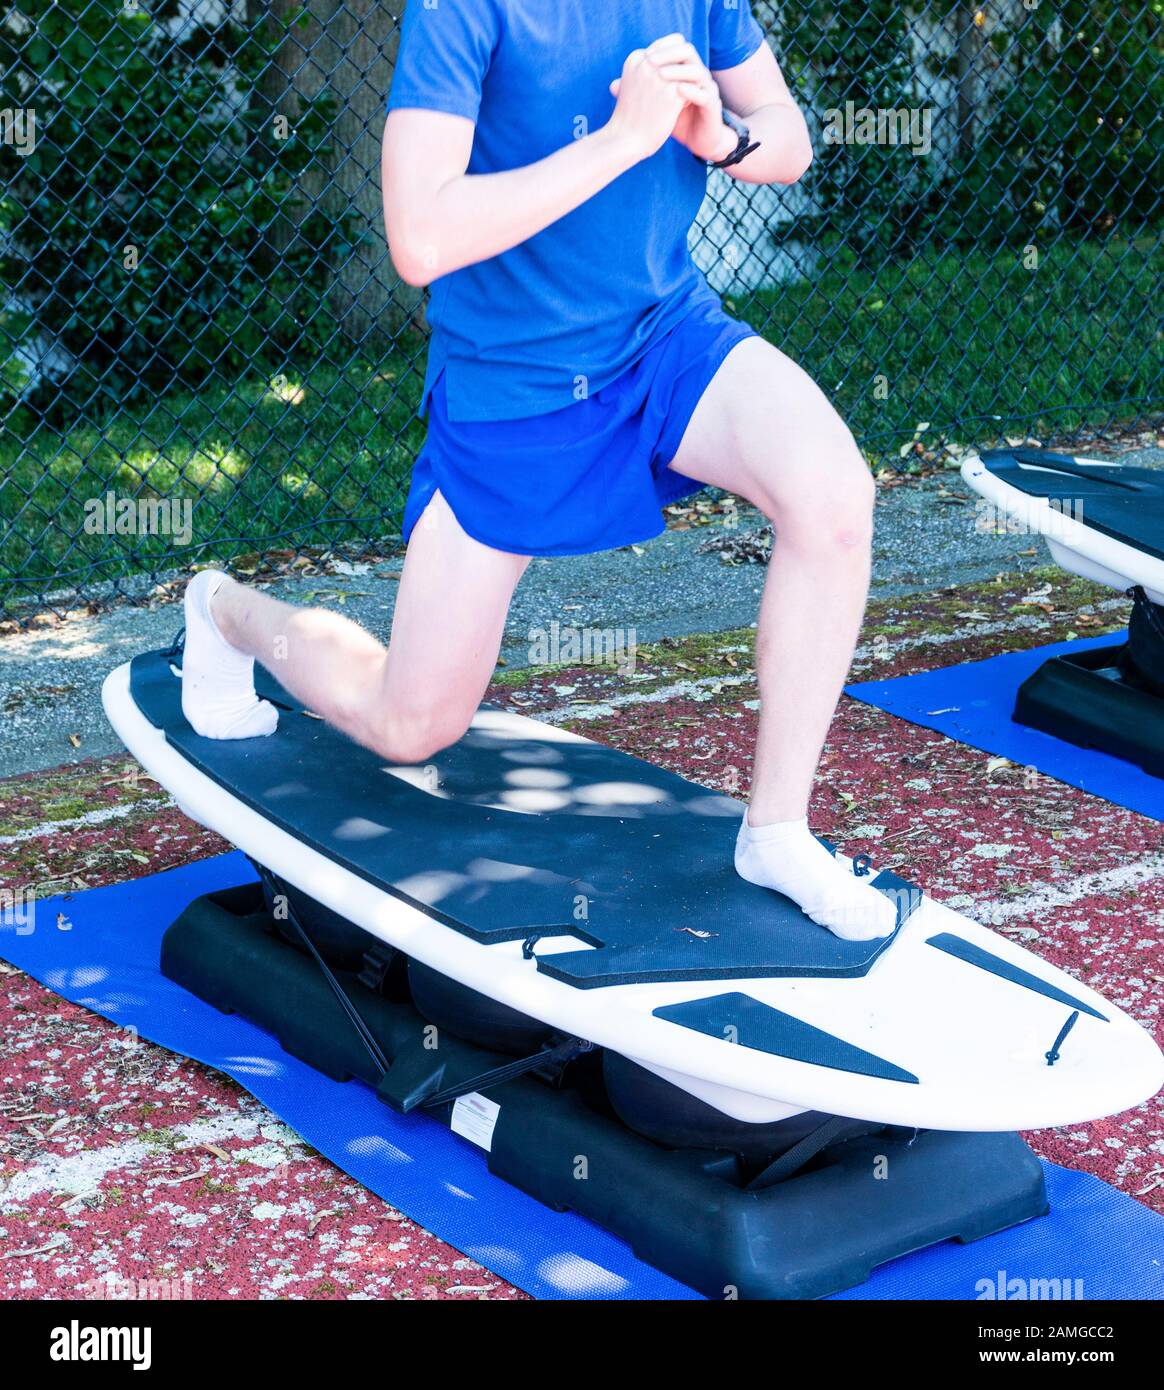 A teenage runner performing lunges on a unstable surboard machine for strength and stability practice during a summer camp in the shade on a track. Stock Photo